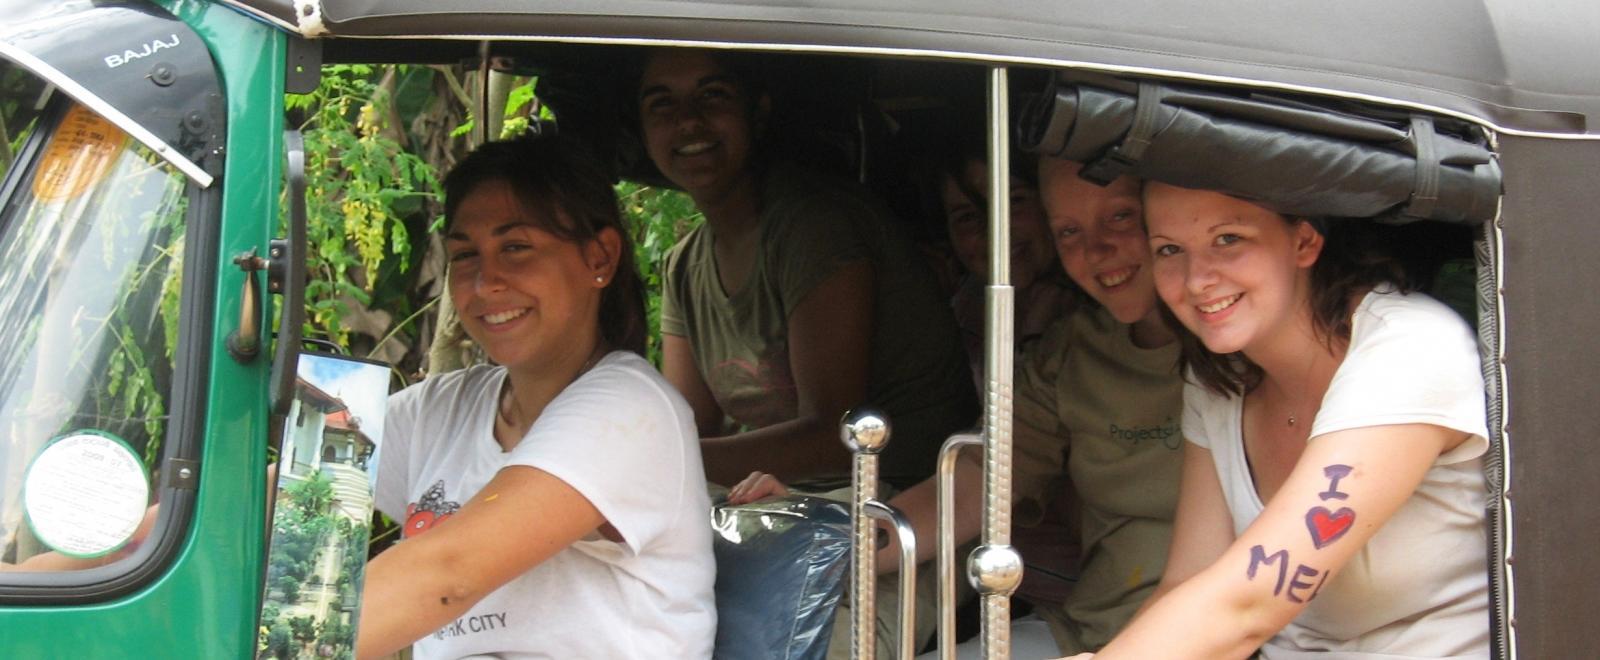 Projects Abroad volunteers travel around Sri Lanka in a tuk tuk as part of the tour.